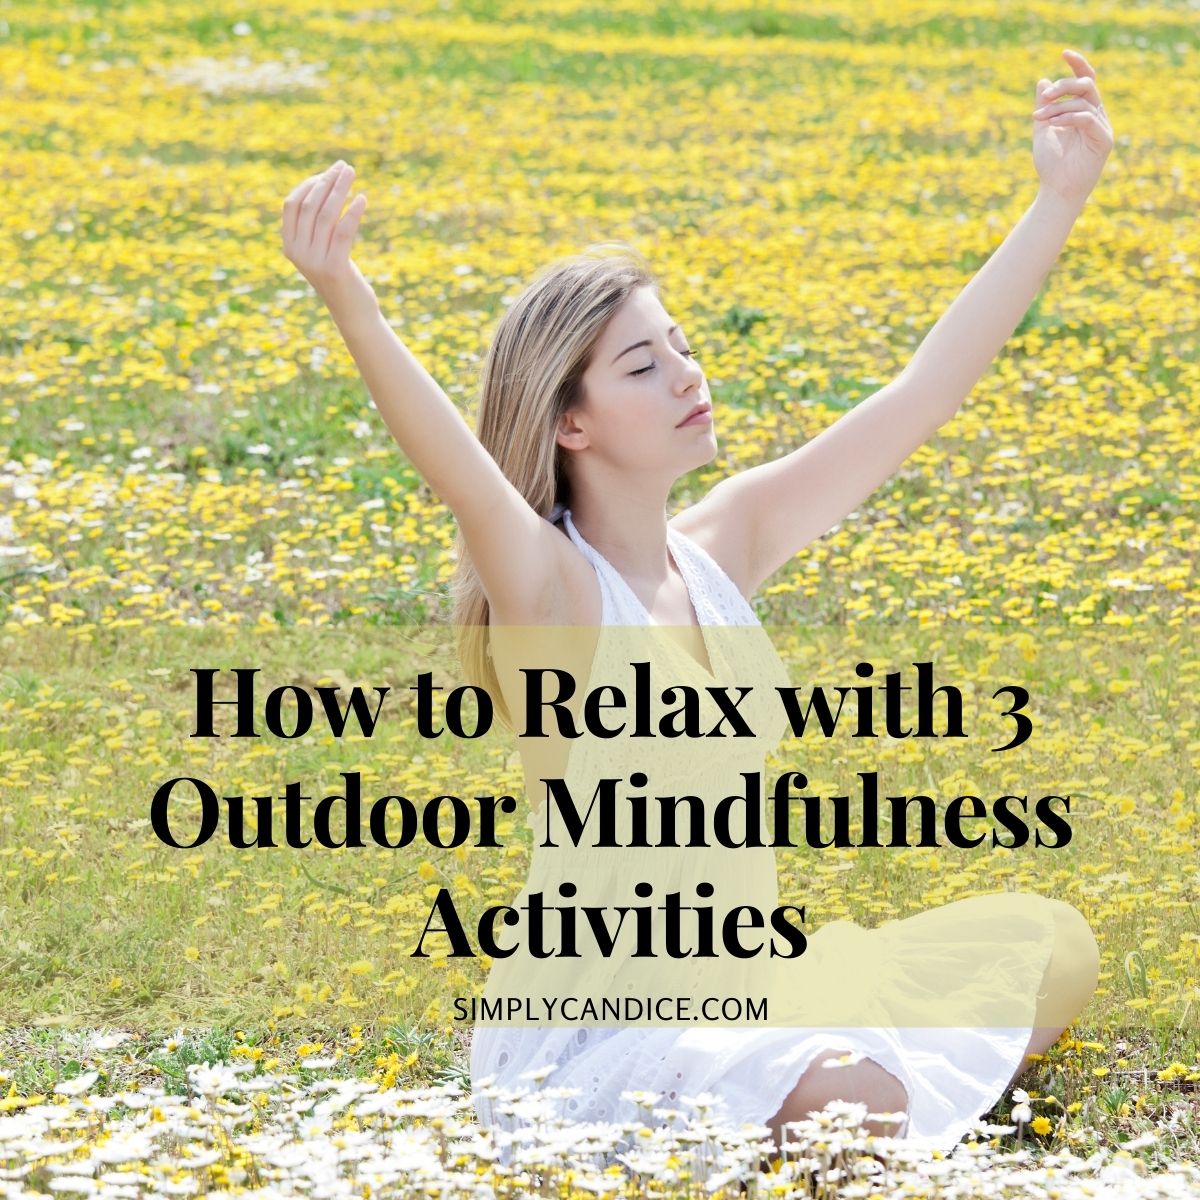 How to Relax Outdoors with 3 Mindfulness Activities